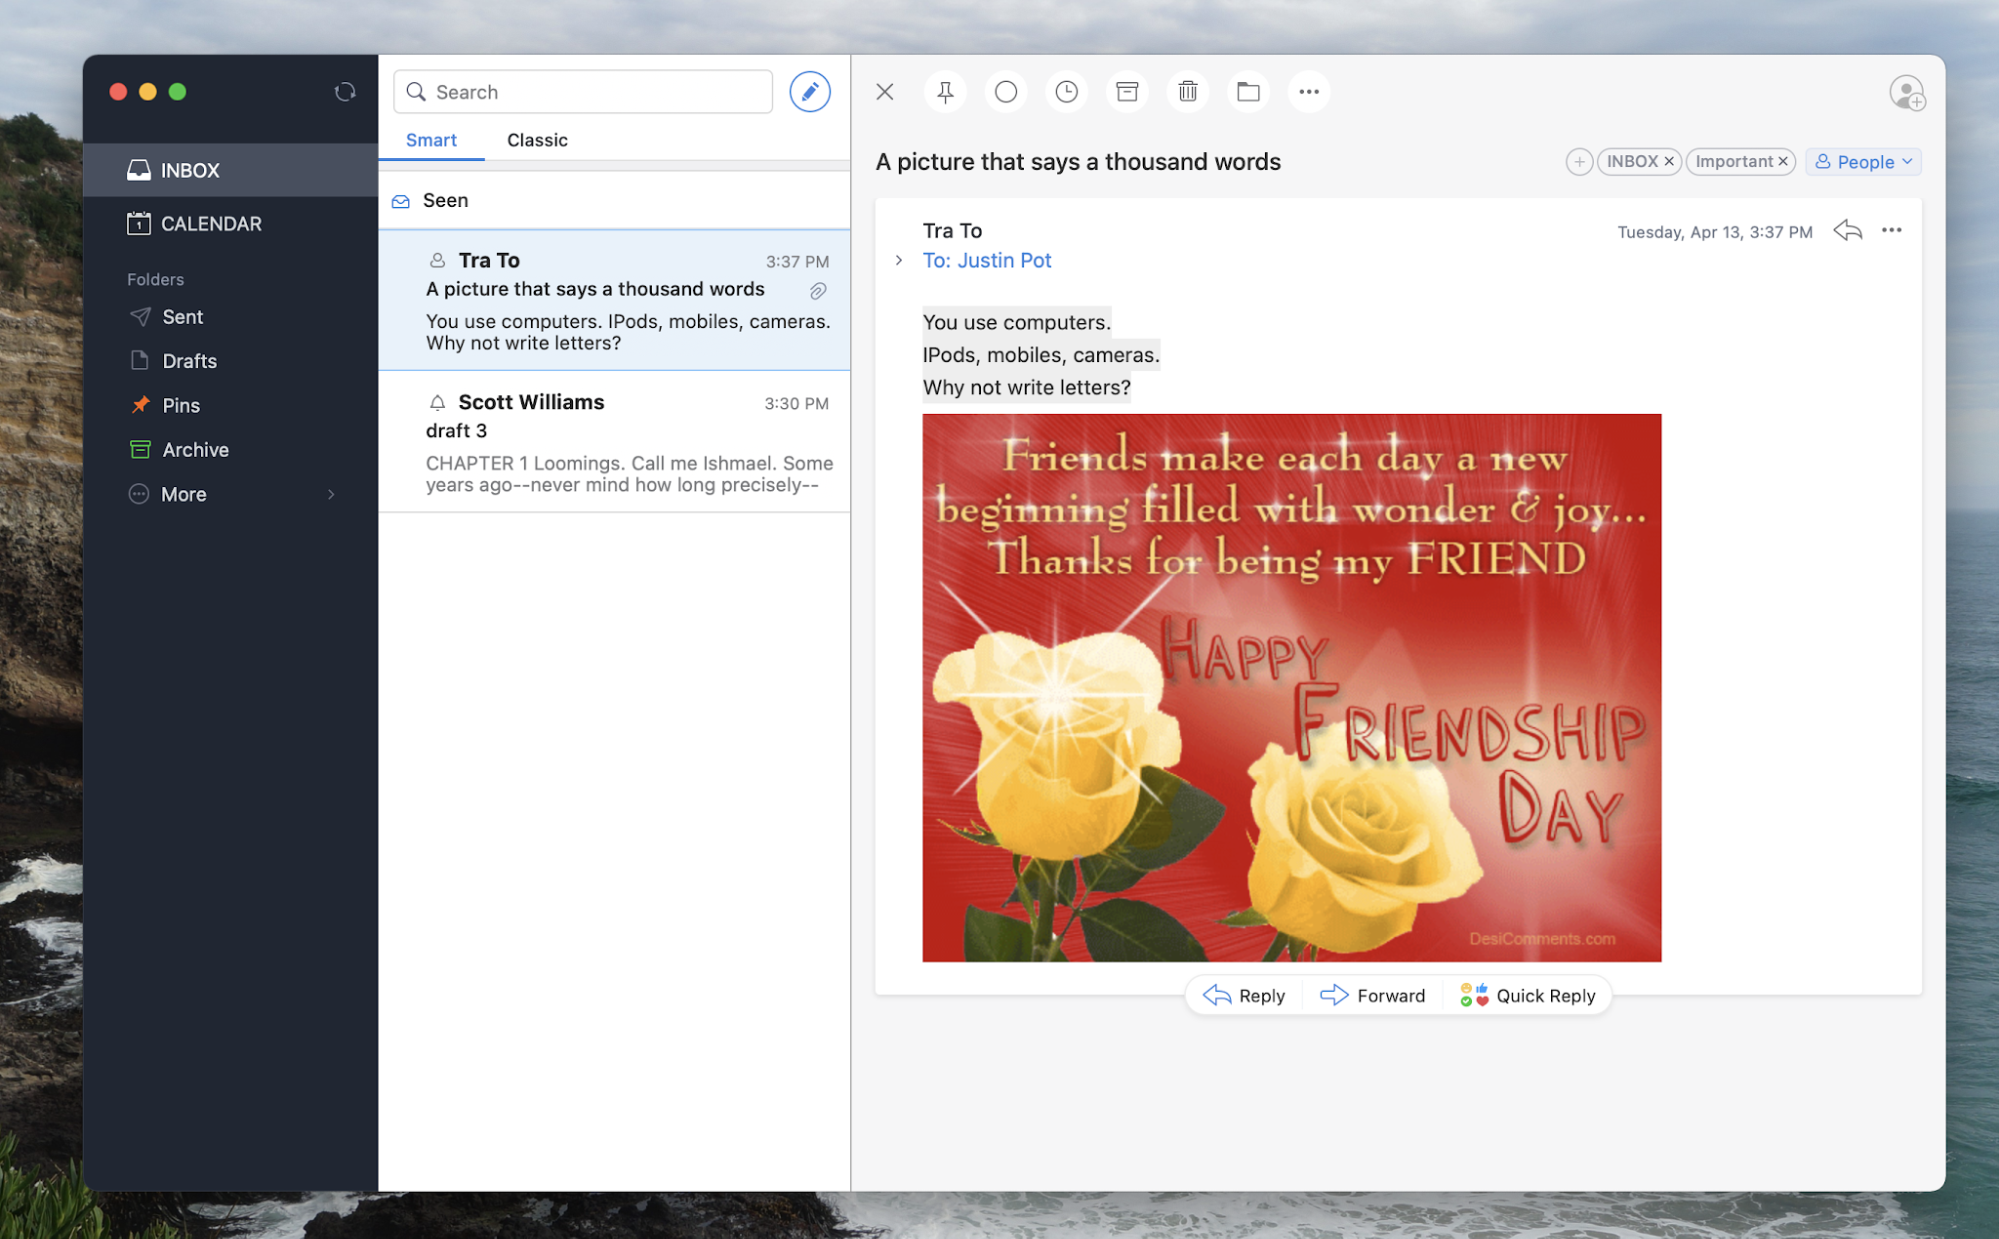 best email client for getting things done mac